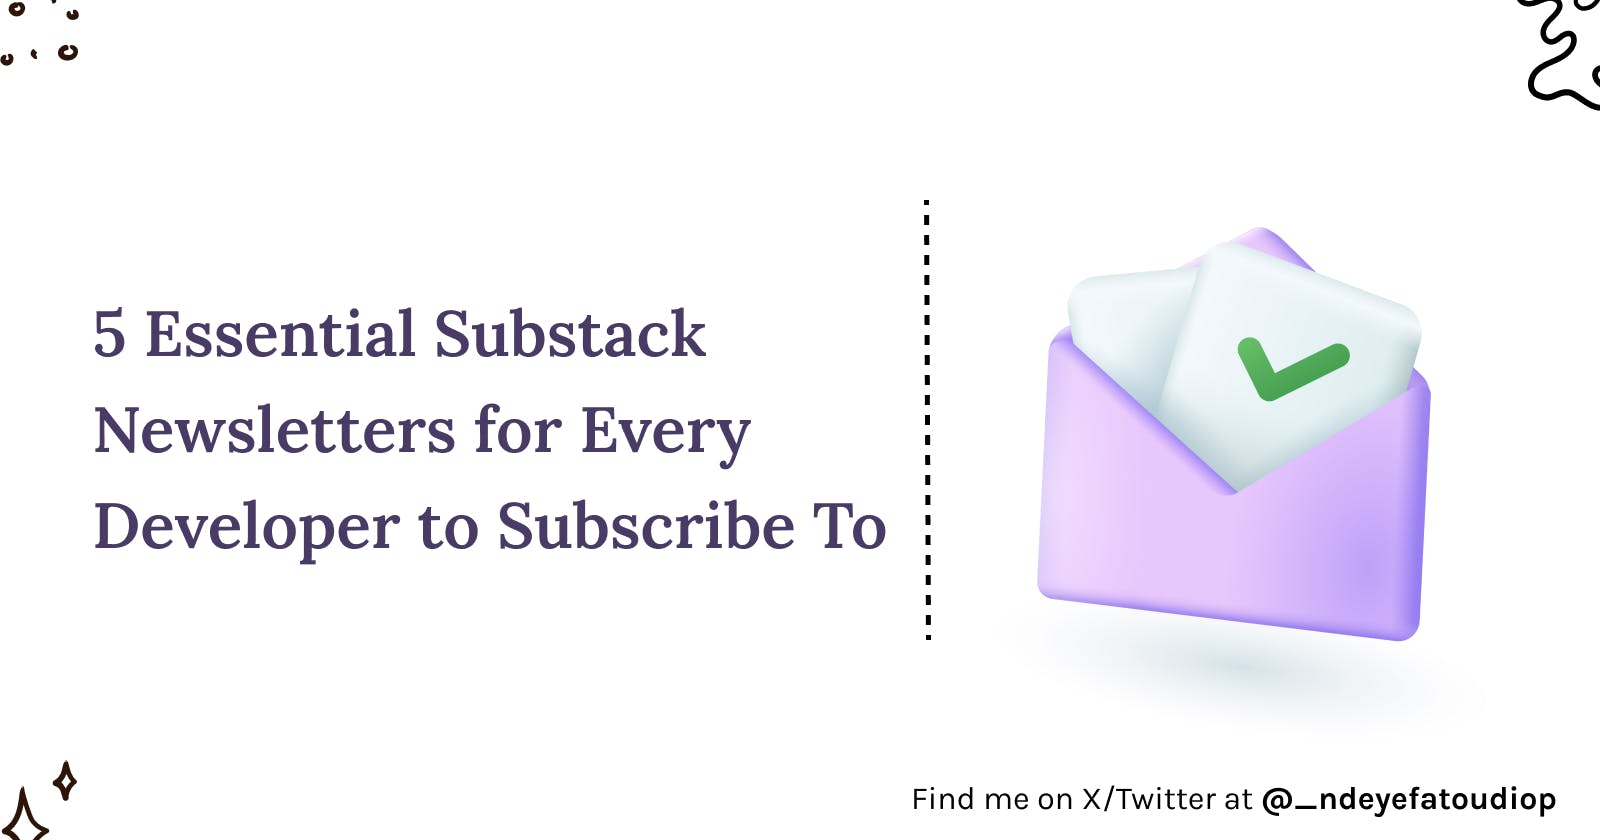 5 Essential Substack Newsletters for Every Developer to Subscribe To 💌